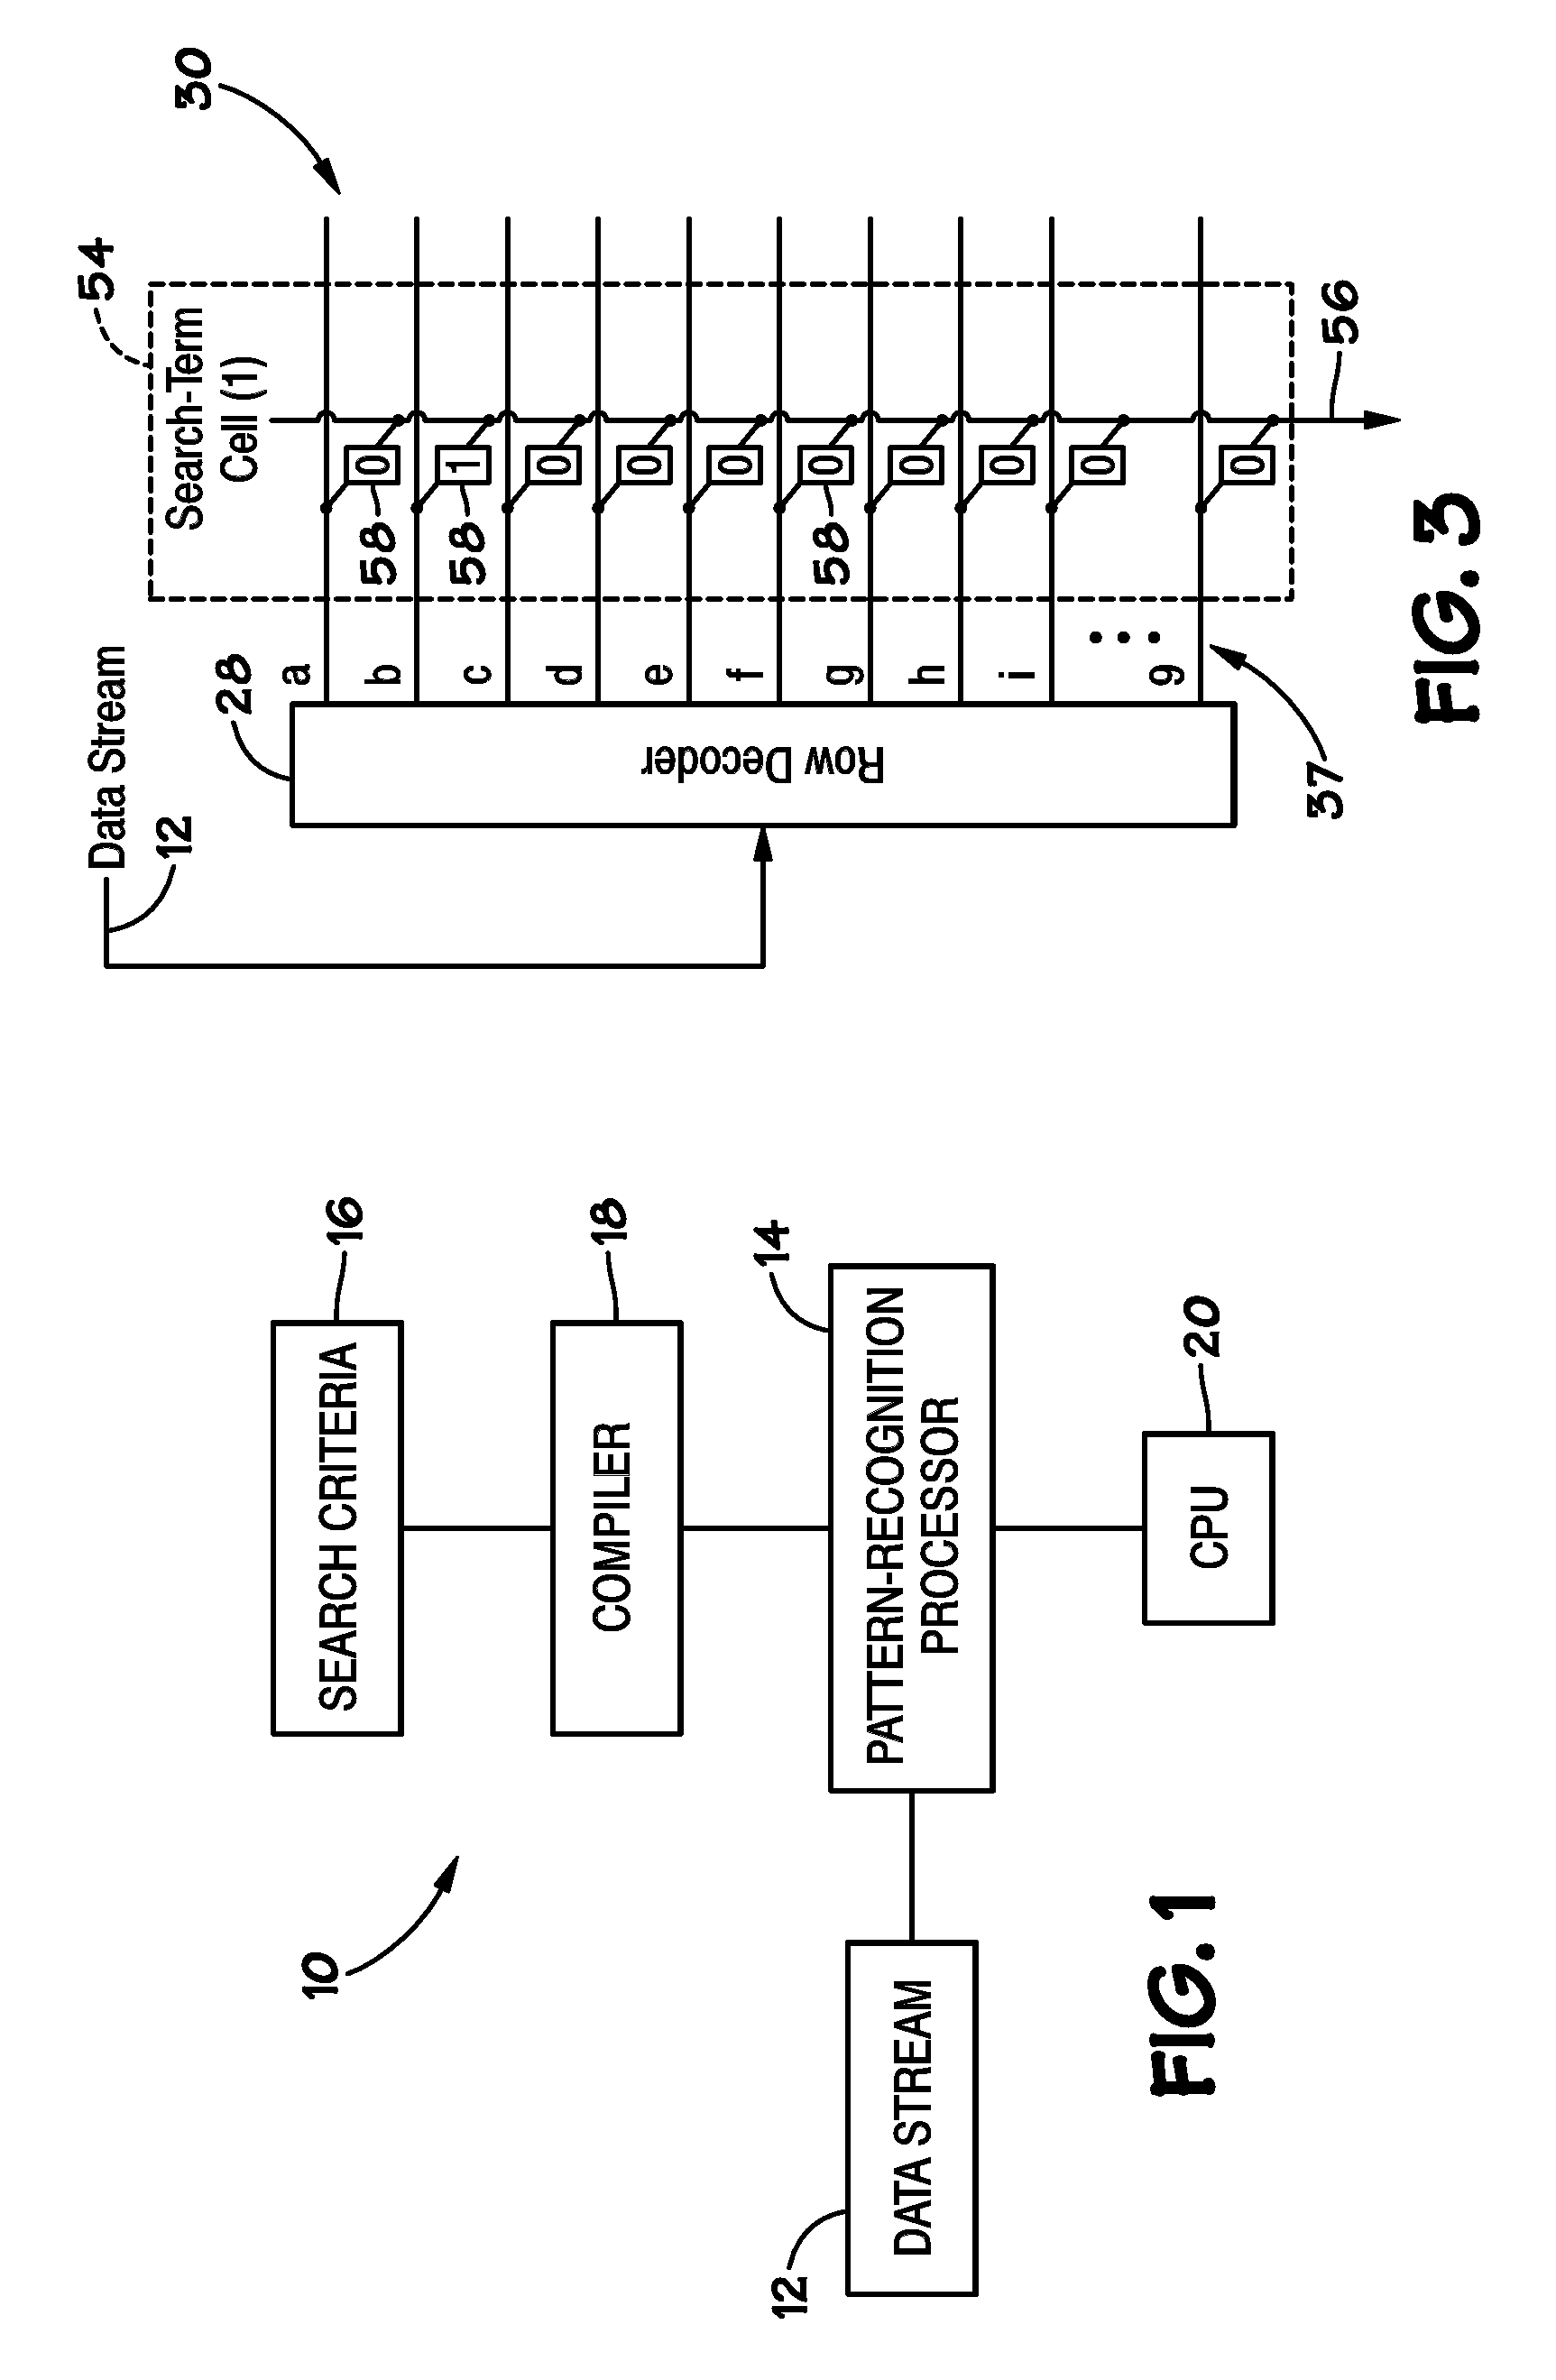 Indirect register access method and system